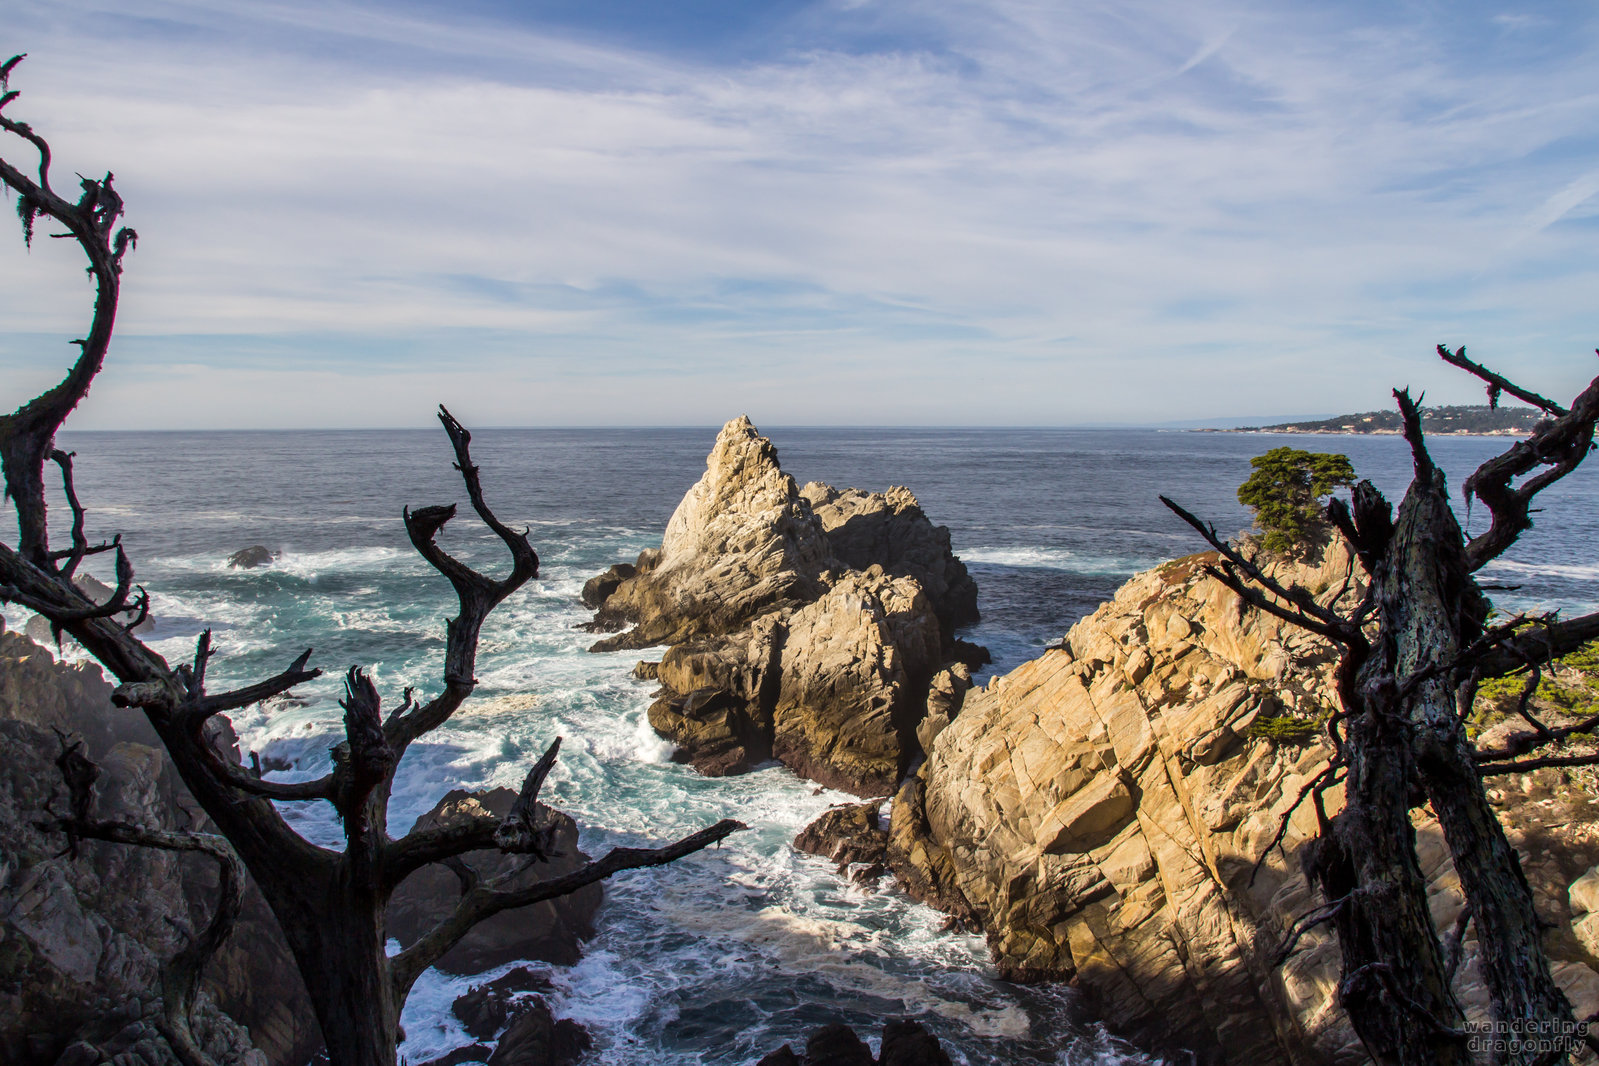 Cliffs with dry branches -- branch, cliff, ocean, rock, sky, tree, water